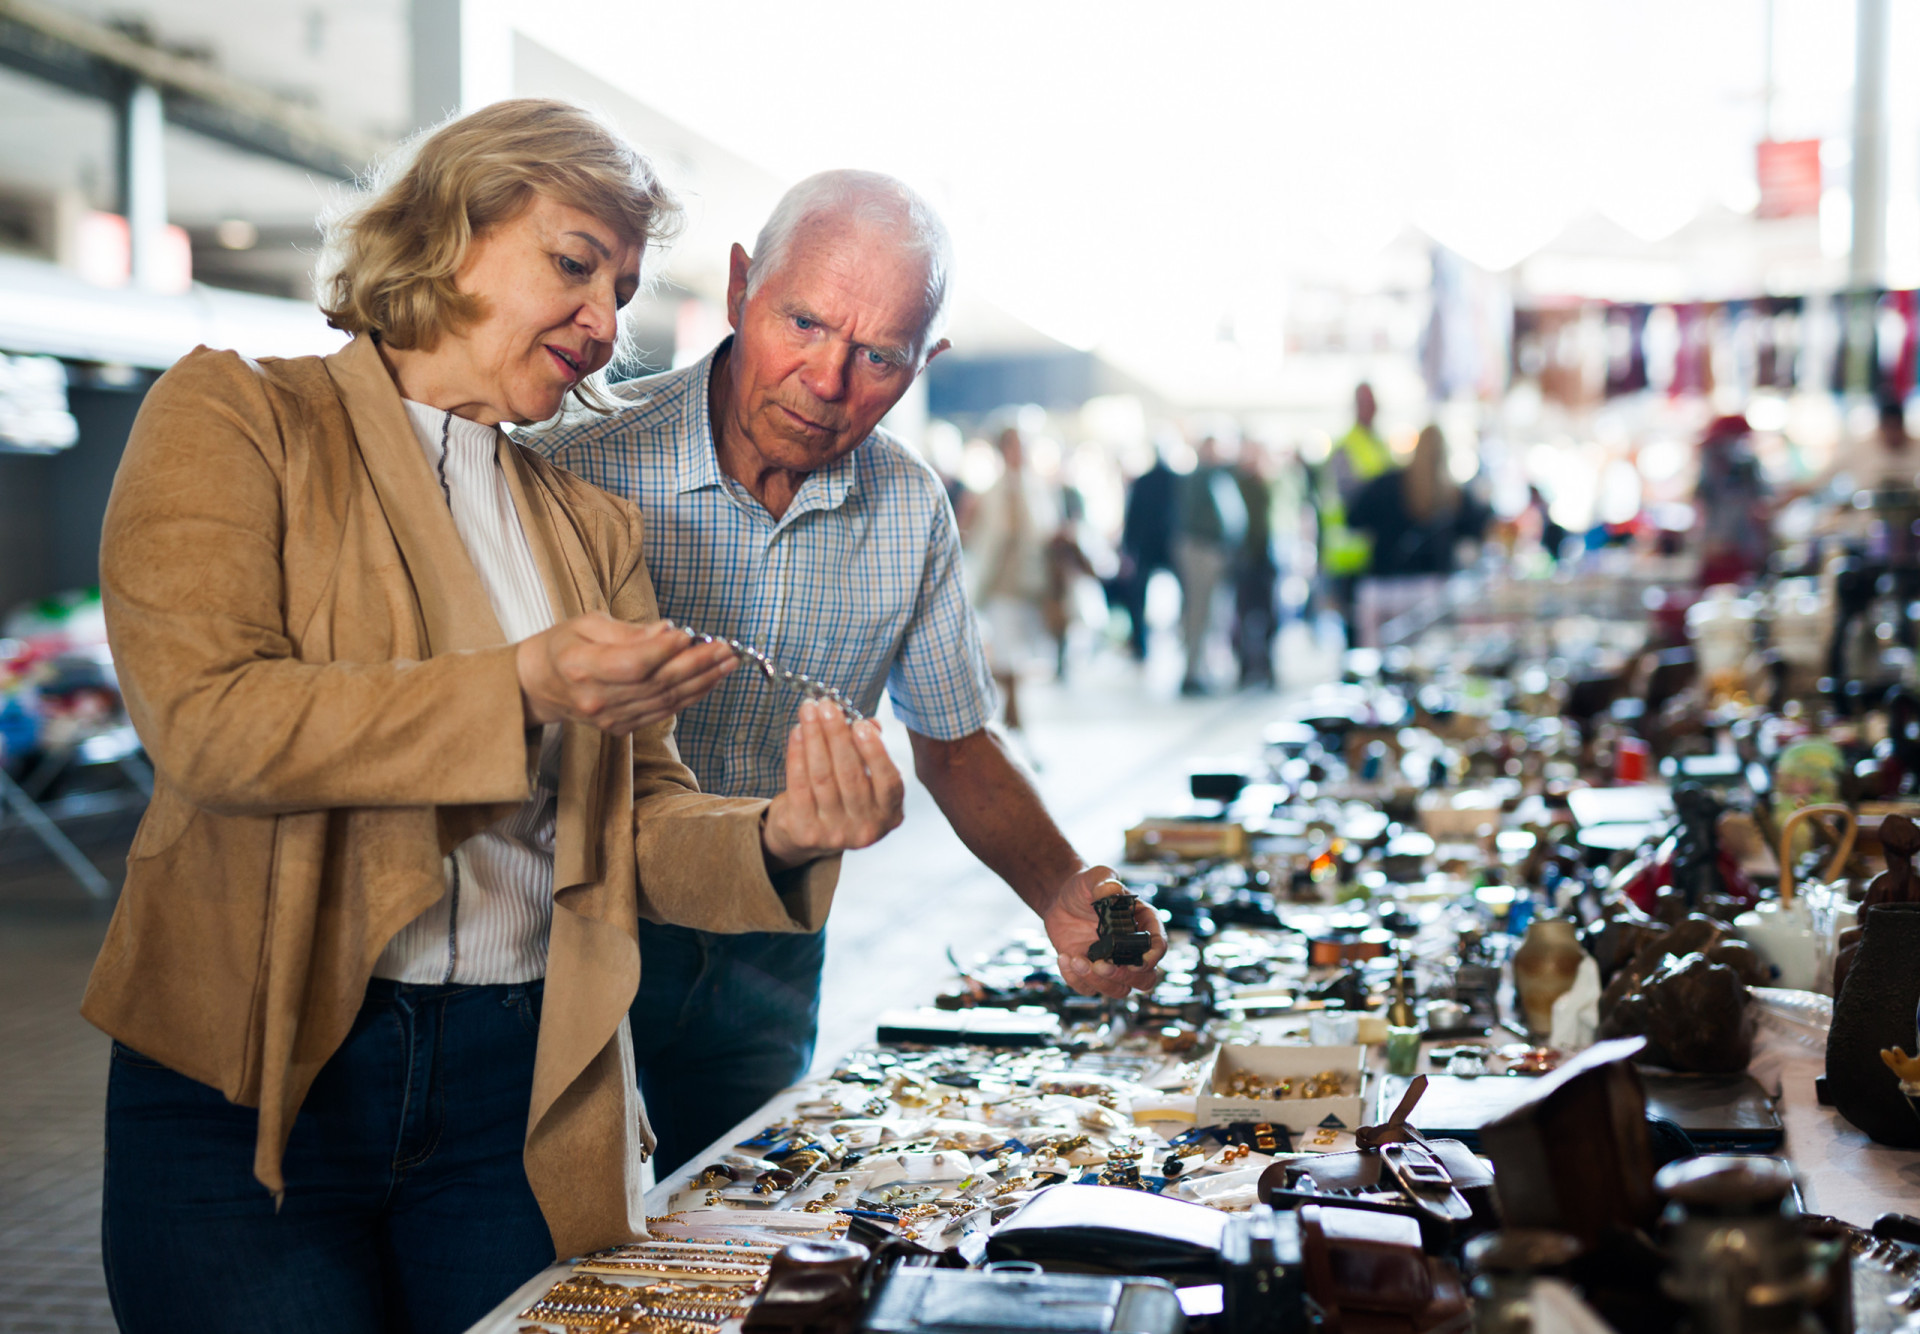 <p>Flea markets are extremely popular, as people love looking through tables full of other people's unwanted items. Make sure to change your layout and put new stuff out for sale often. You want people to come back time and time again to see what's new.</p>